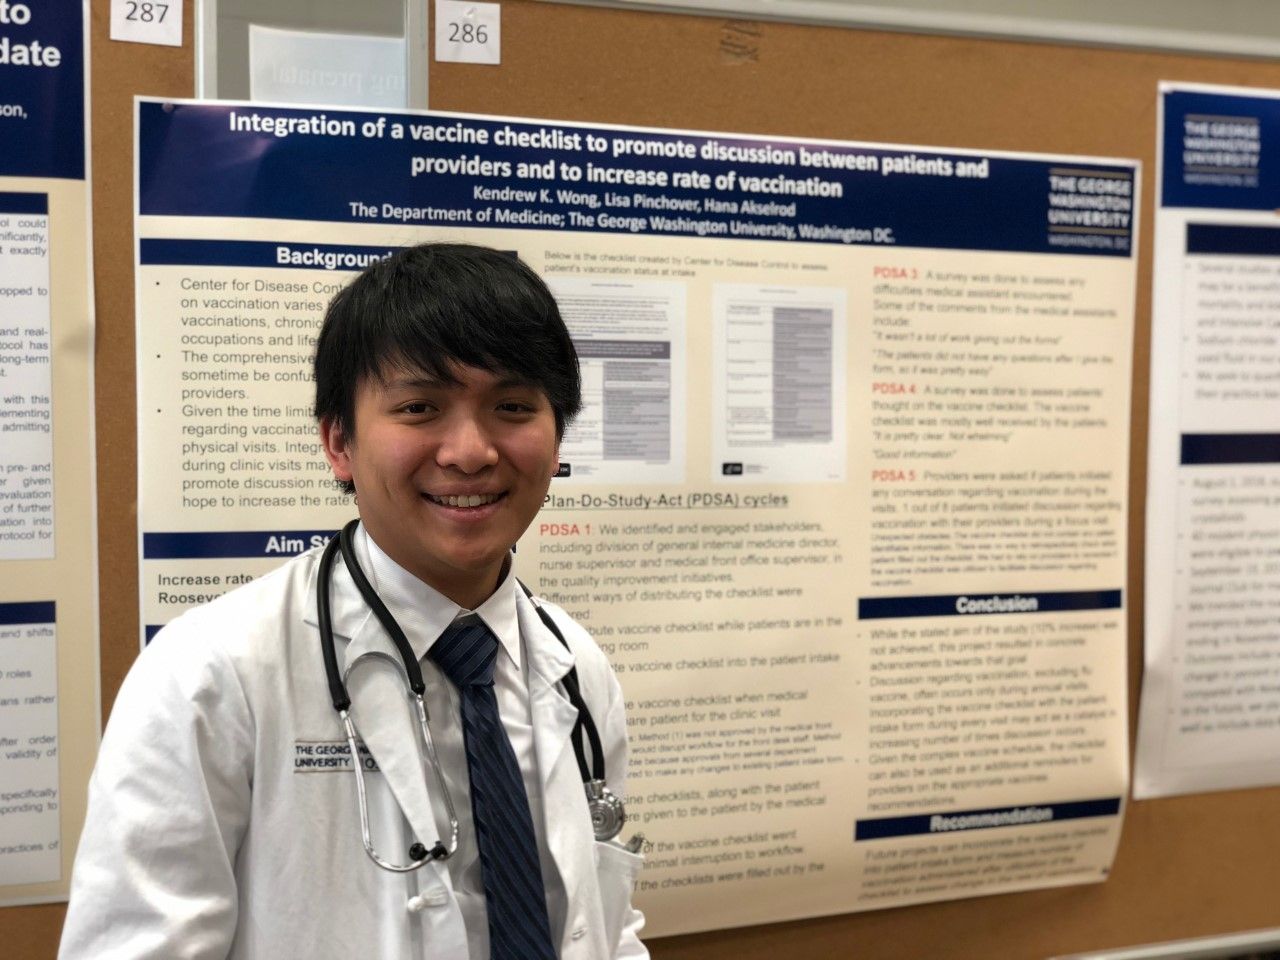 GW Resident posing with his research presentation